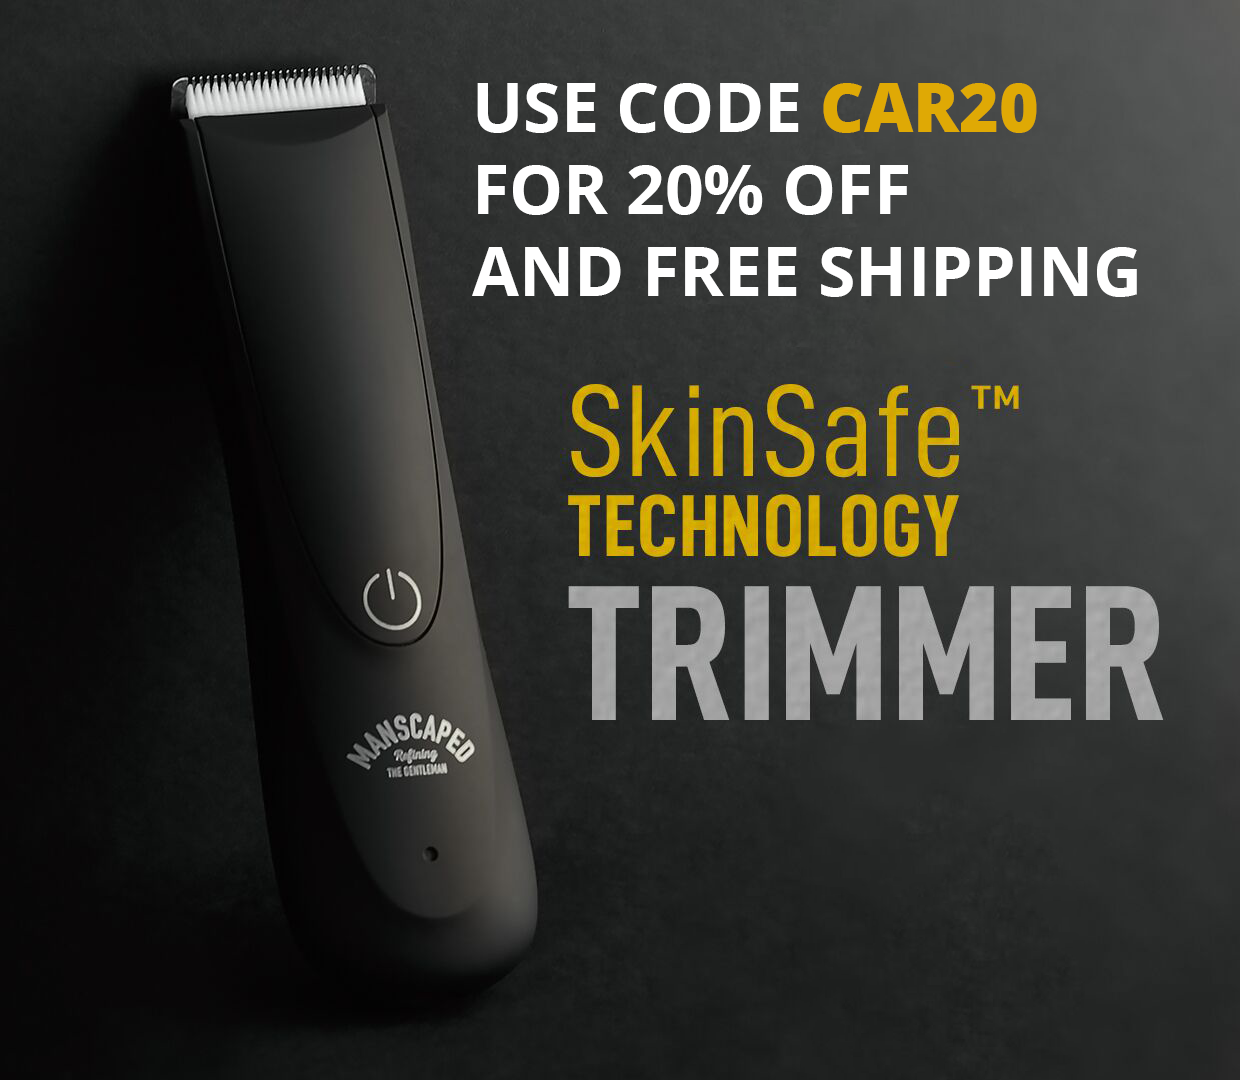 Use code CAR20 for 20% off and free shipping from Manscaped